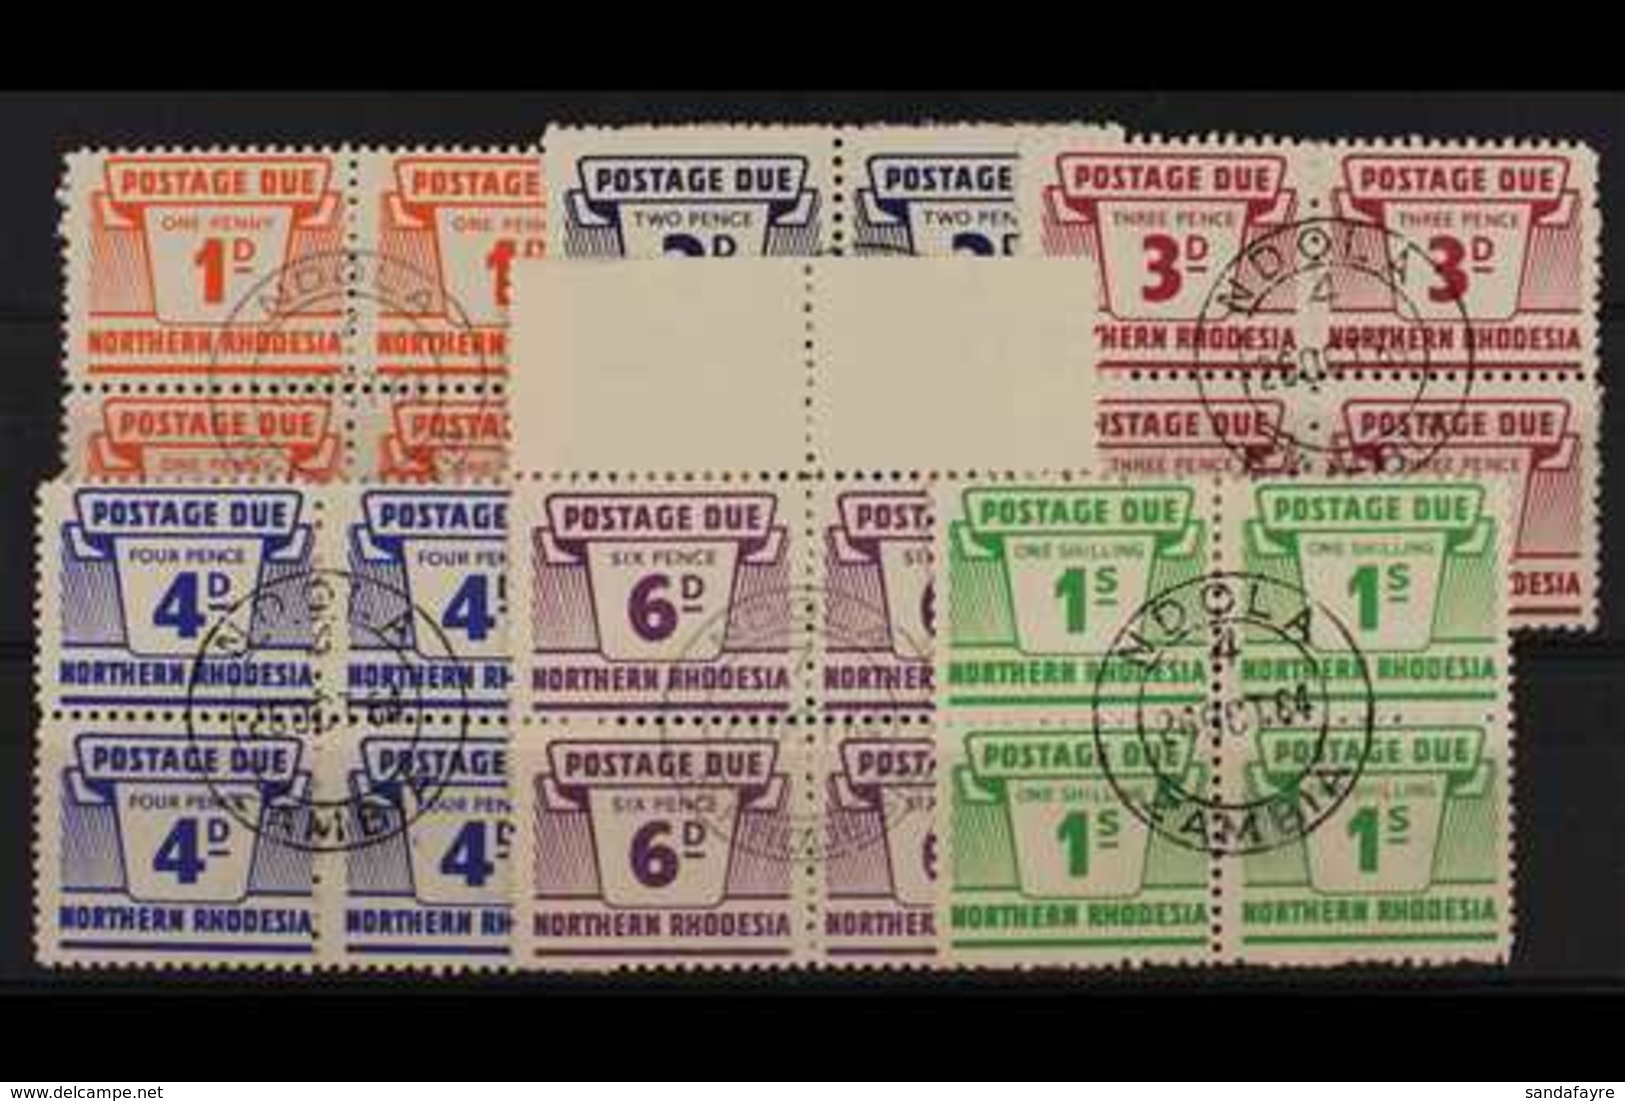 POSTAGE DUES 1963 Complete Set In BLOCKS OF FOUR, SG D5/10, Very Fine Used With Central C.d.s. Postmarks (6 Blocks). For - Northern Rhodesia (...-1963)